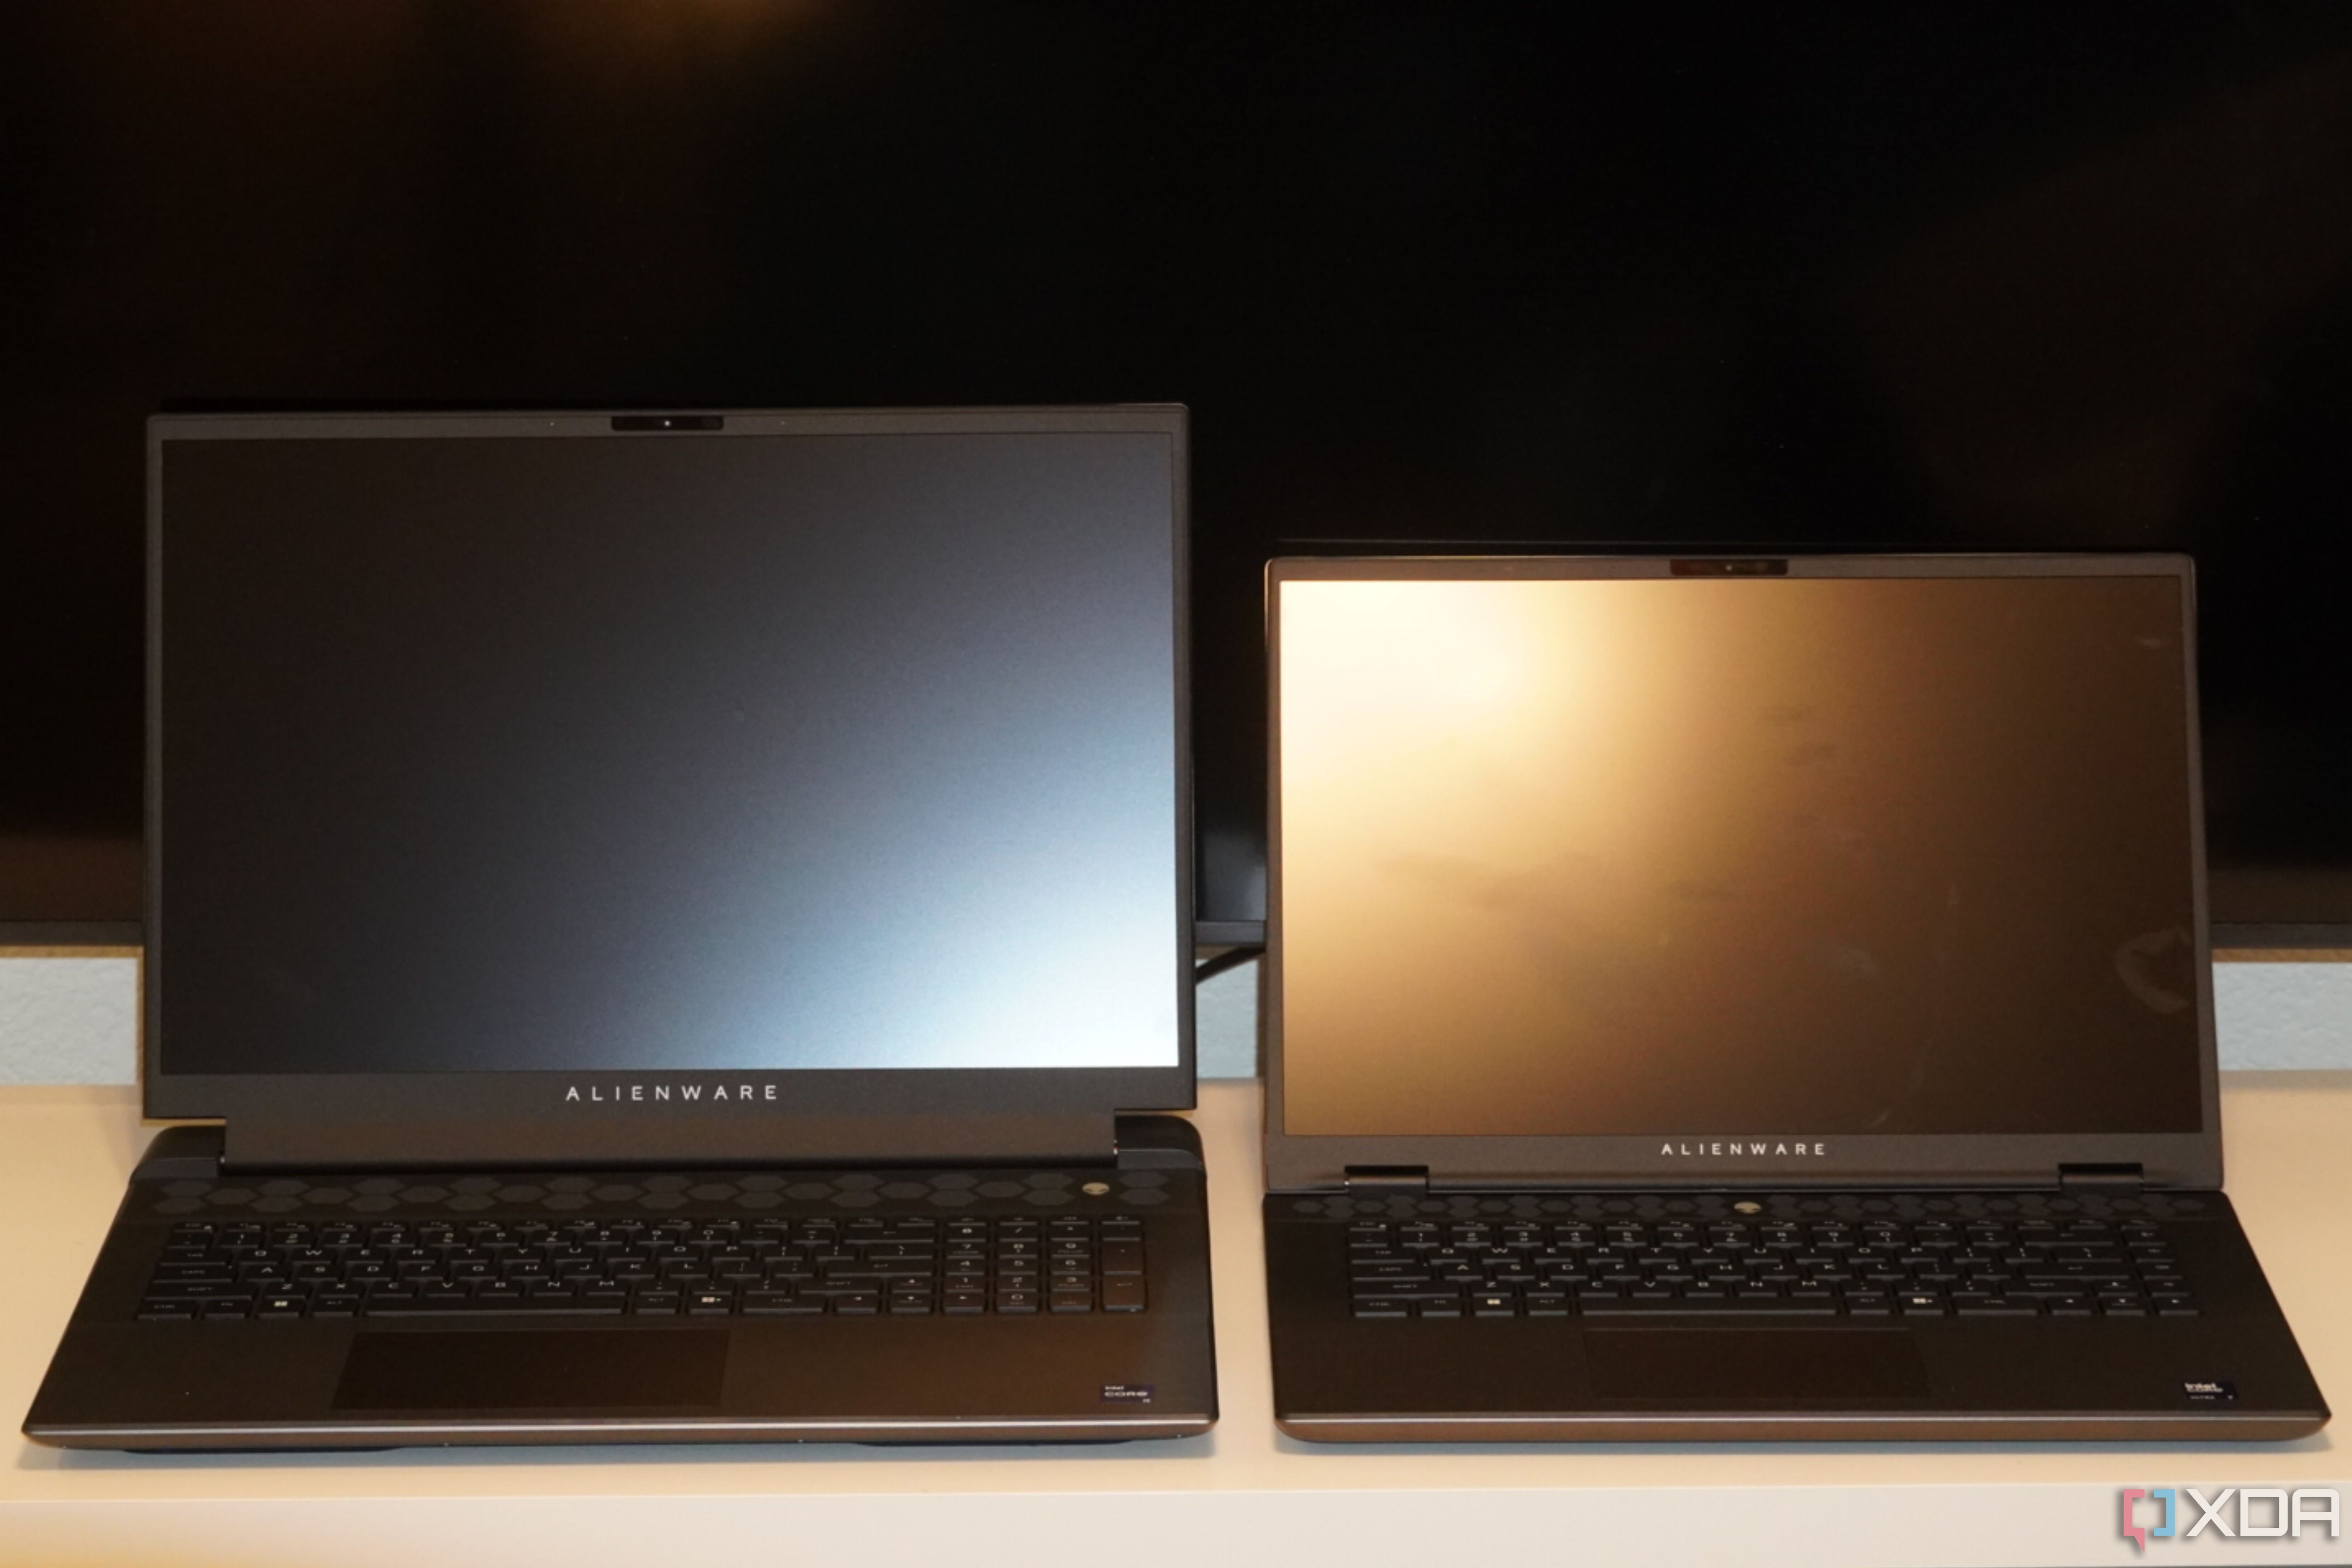 An Alienware m18 R2 (left) compared to an Alienware m16 R2 (right).